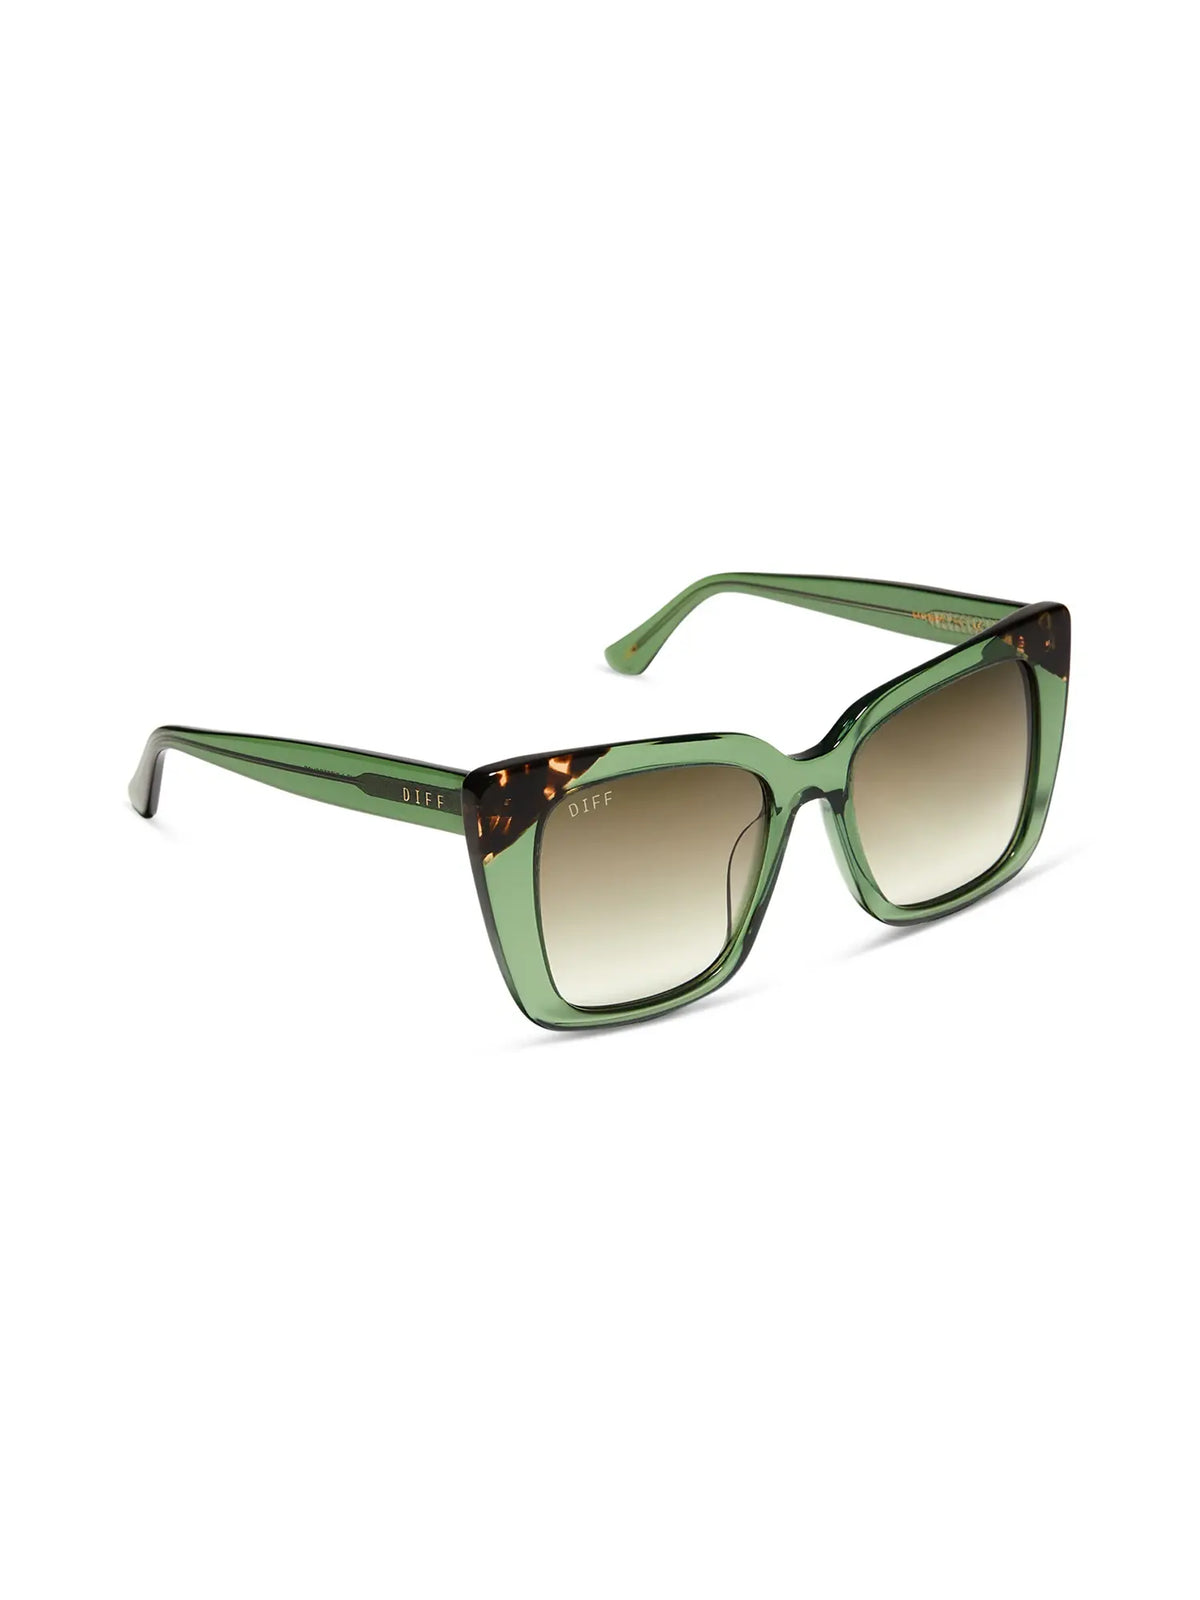 DIFF eyewear lizzy sunglasses in sage crystal and g15 gradient